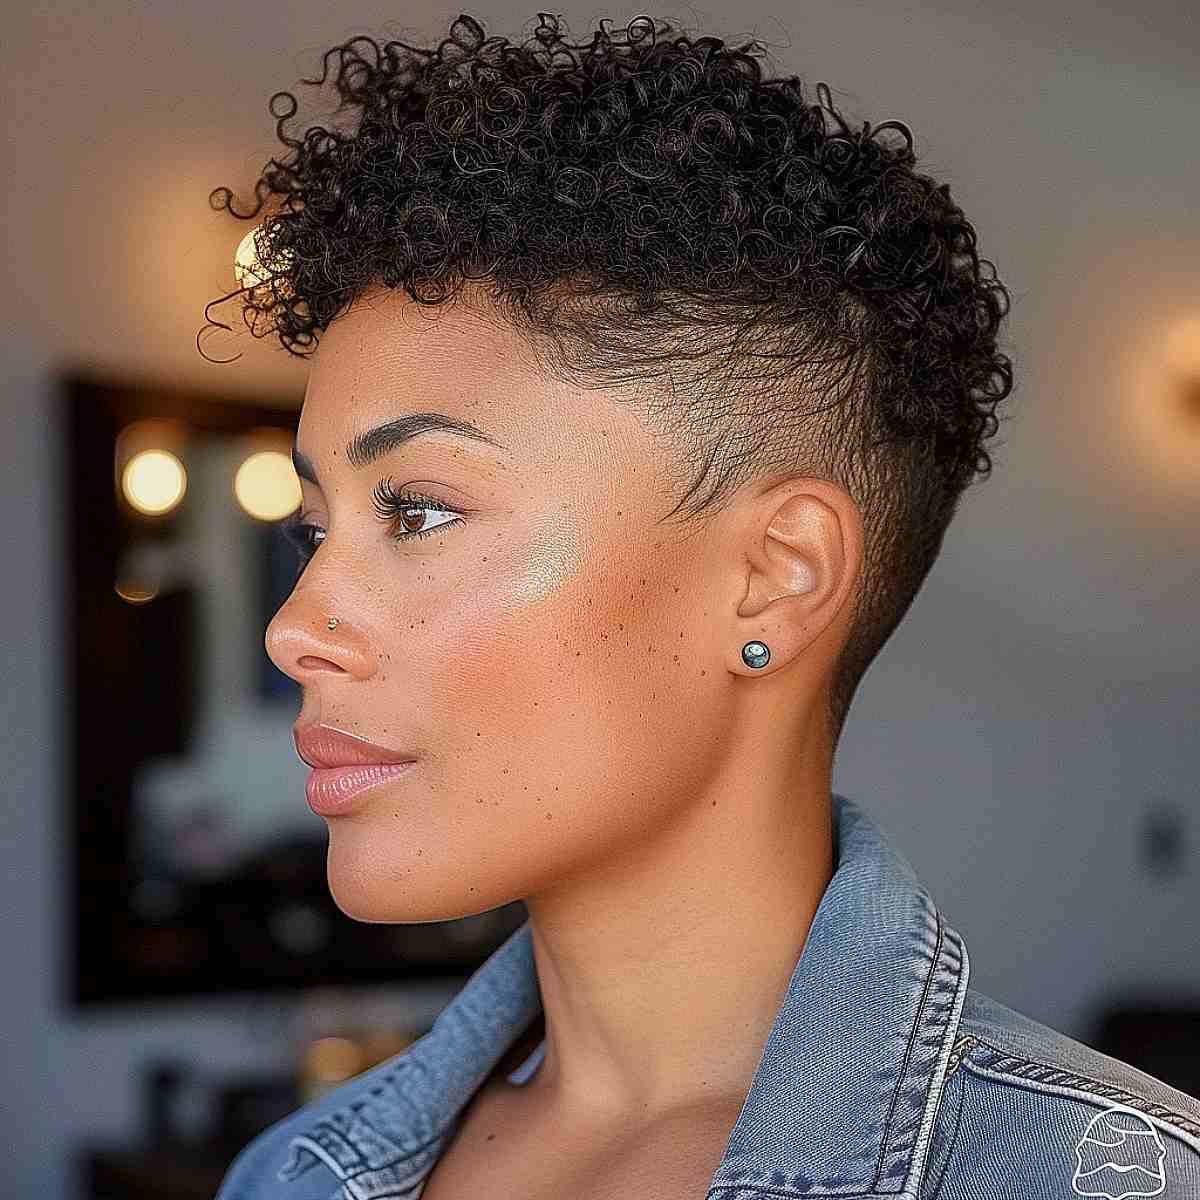 Short Hair for Black Woman with an Oval Face